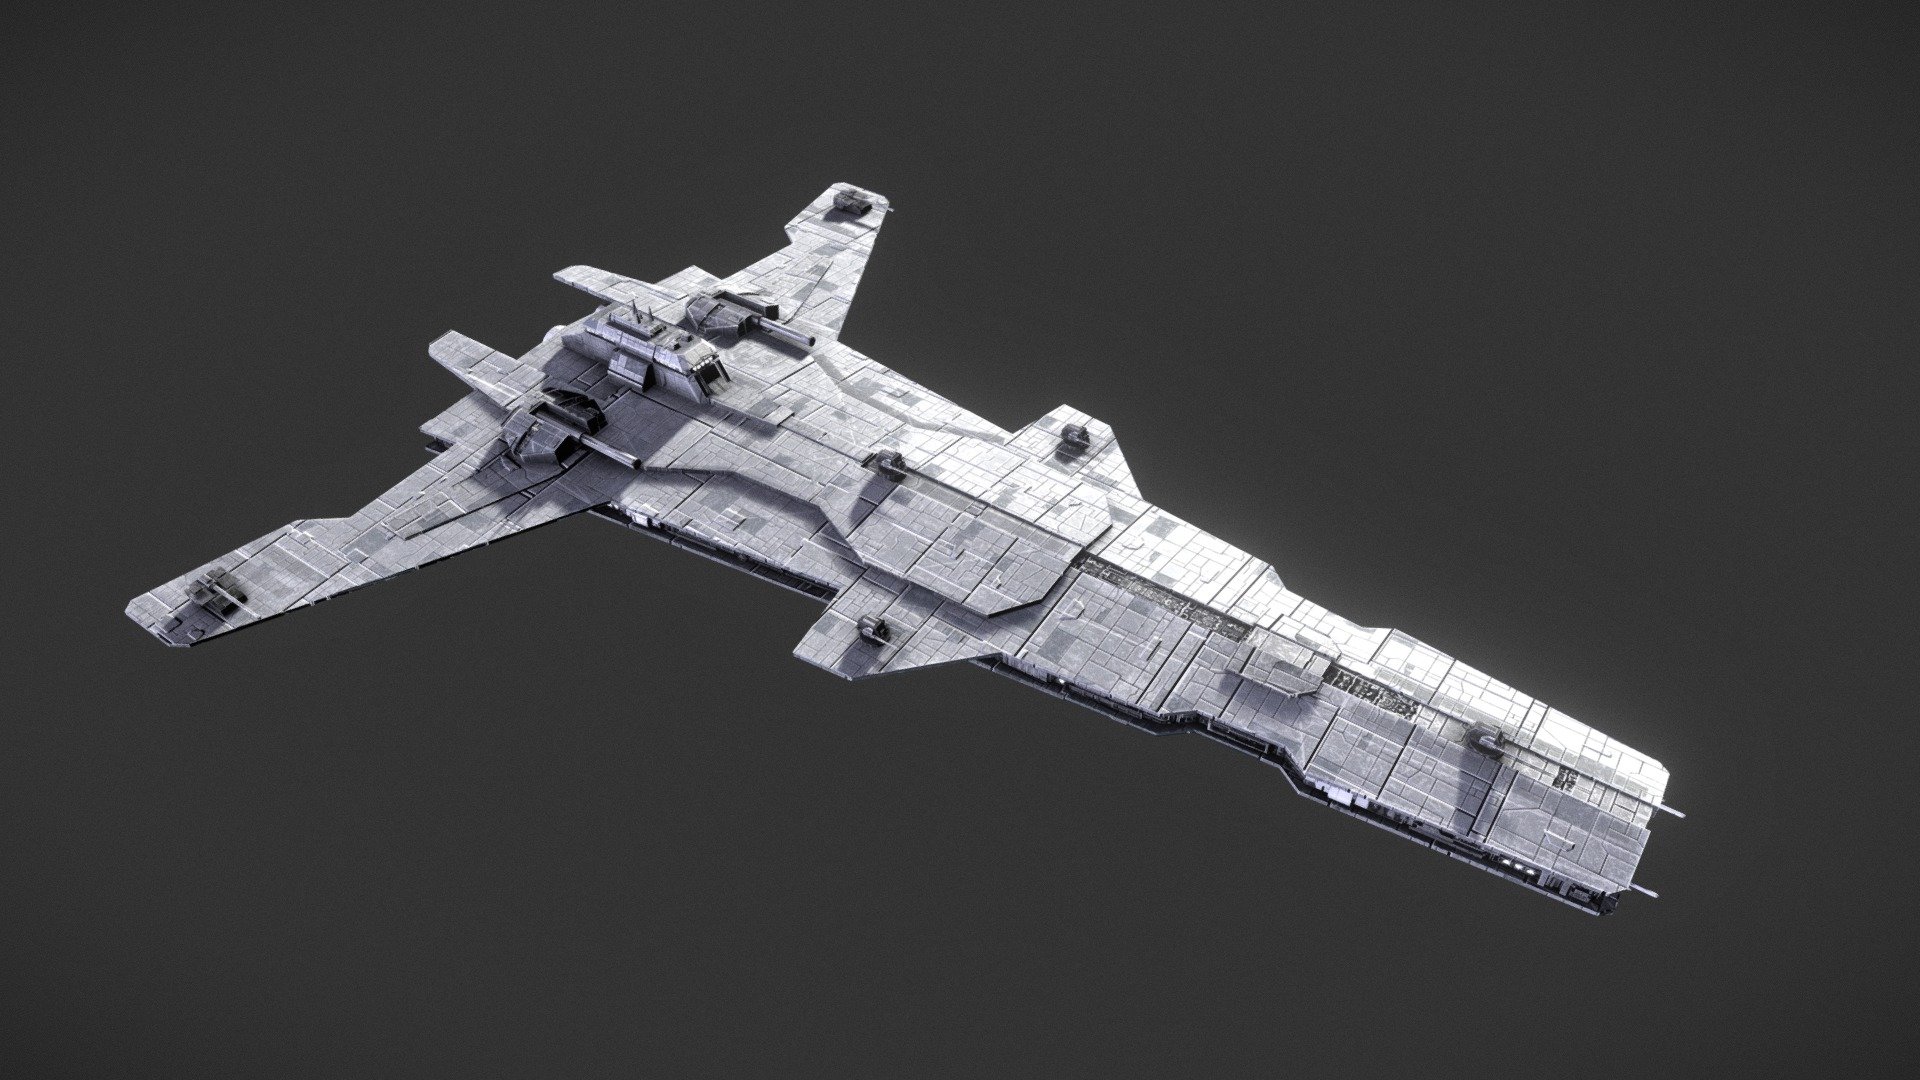 Originally a design from Battlefront 2 (2005) I've built a new model with a few design tweaks. 

Built in 3DS Max 2017 and textured in Substance Painter - Victory 2 Class Frigate - 3D model by Conner Bentley (@connerbentley) 3d model